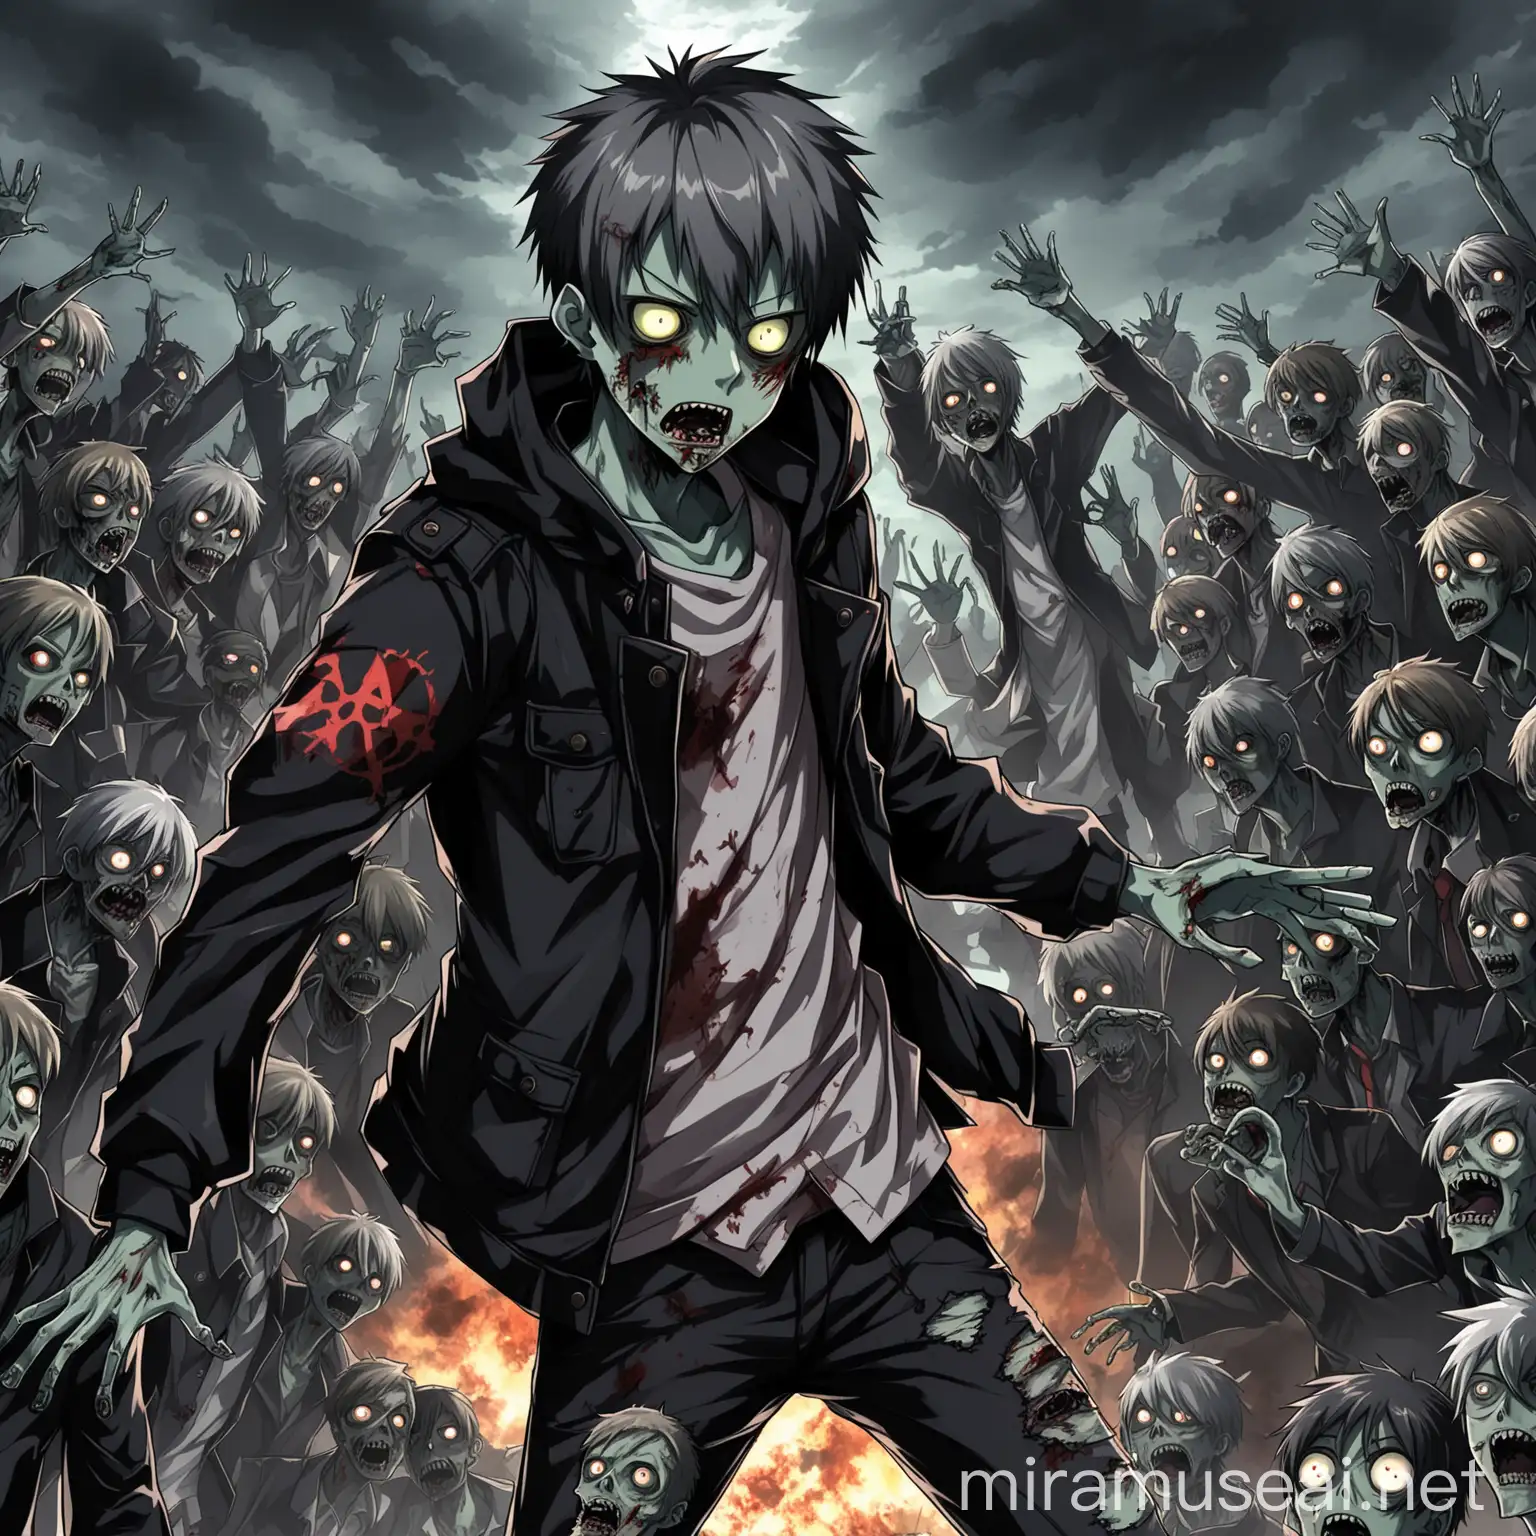 Anime Boy with Black Jacket Holding a Revolver in Zombie Apocalypse